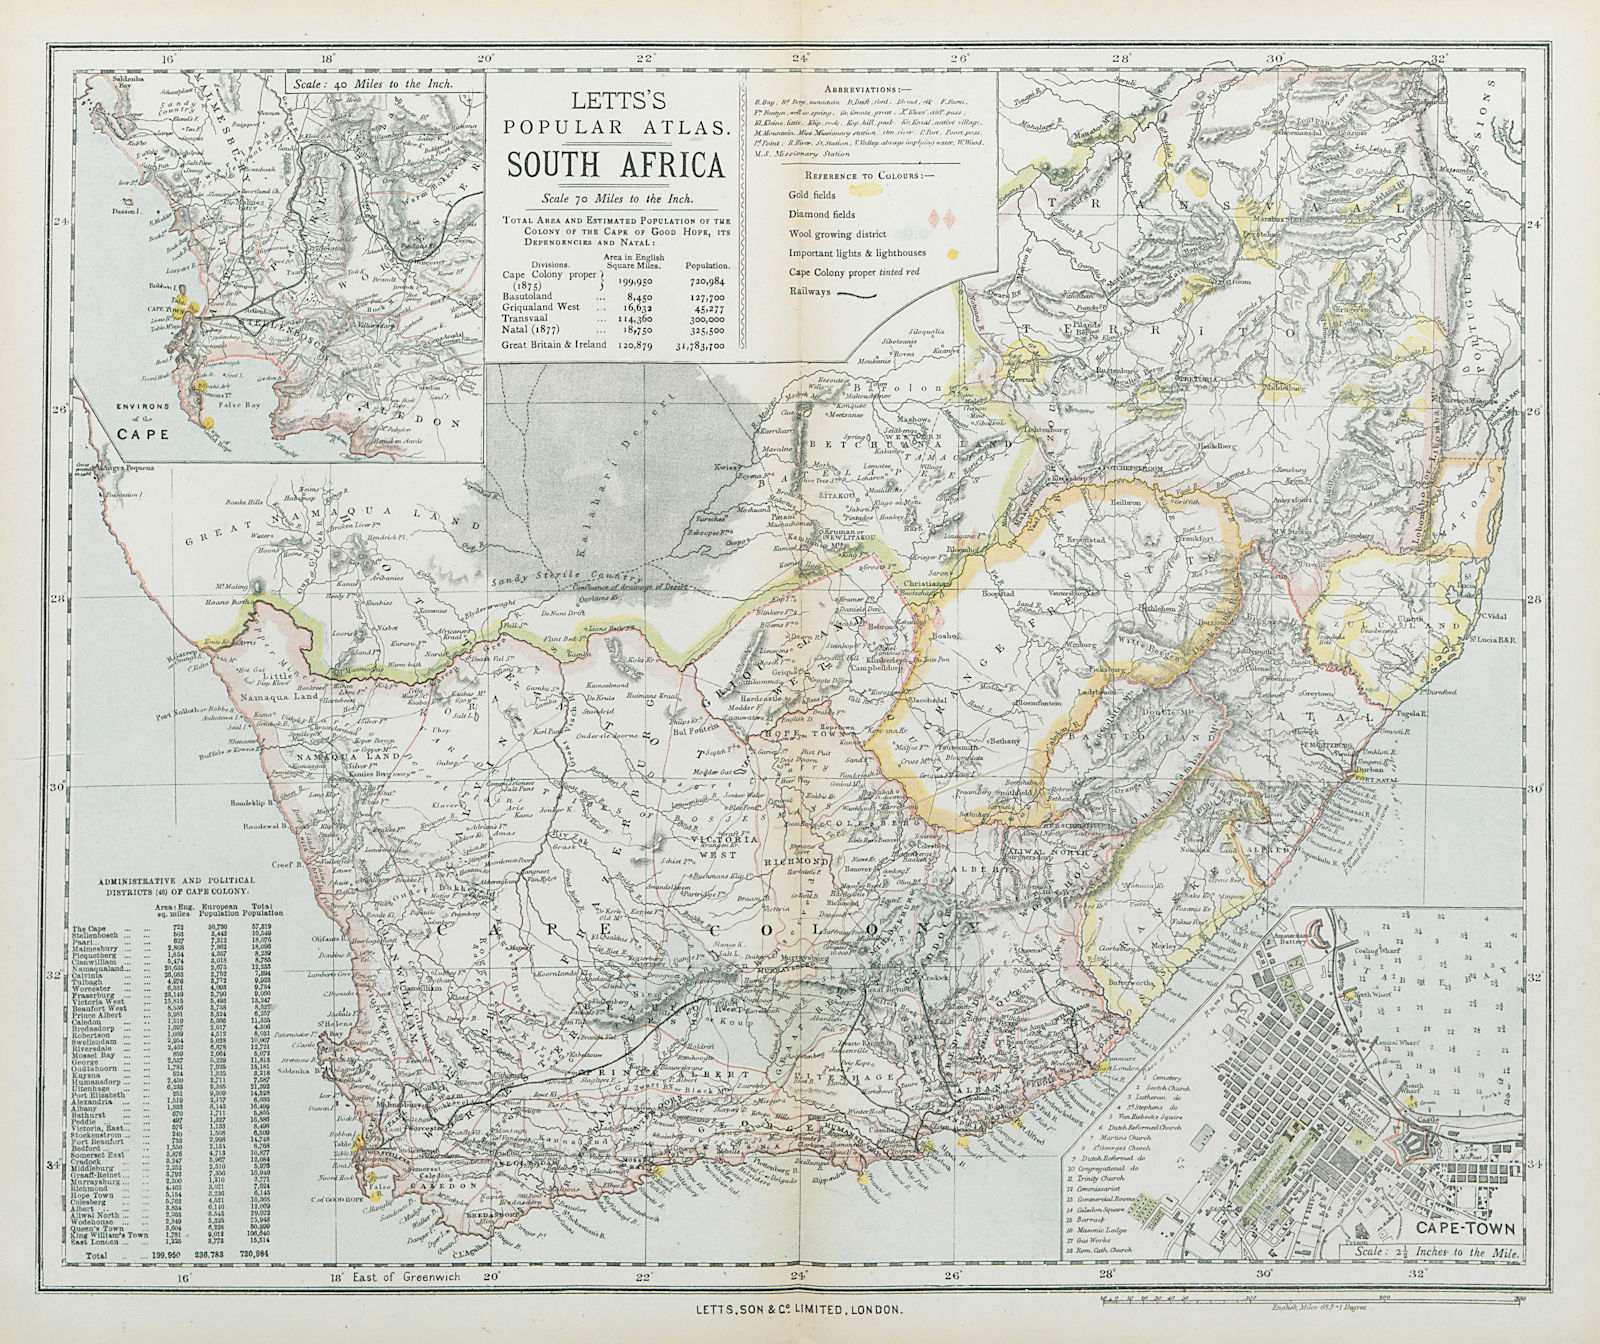 Associate Product SOUTH AFRICA & CAPE TOWN CITY PLAN. Gold & diamond fields. LETTS 1883 map